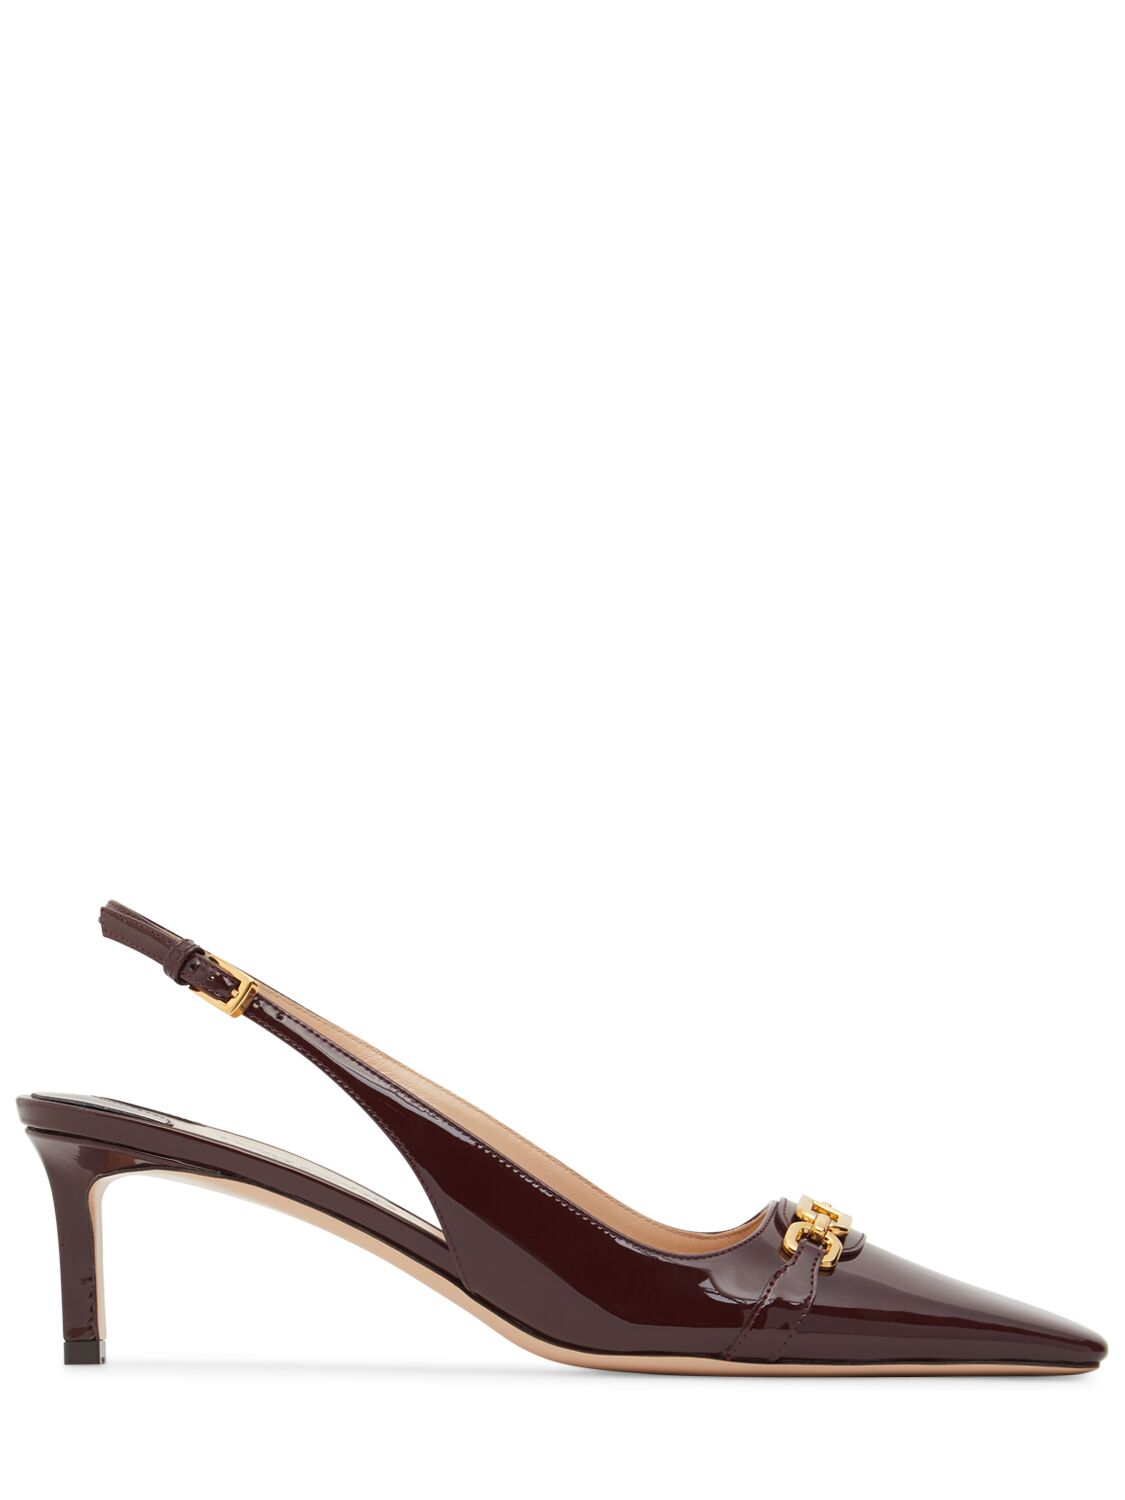 Tom Ford 55mm Patent Leather Slingbacks In Dark Red